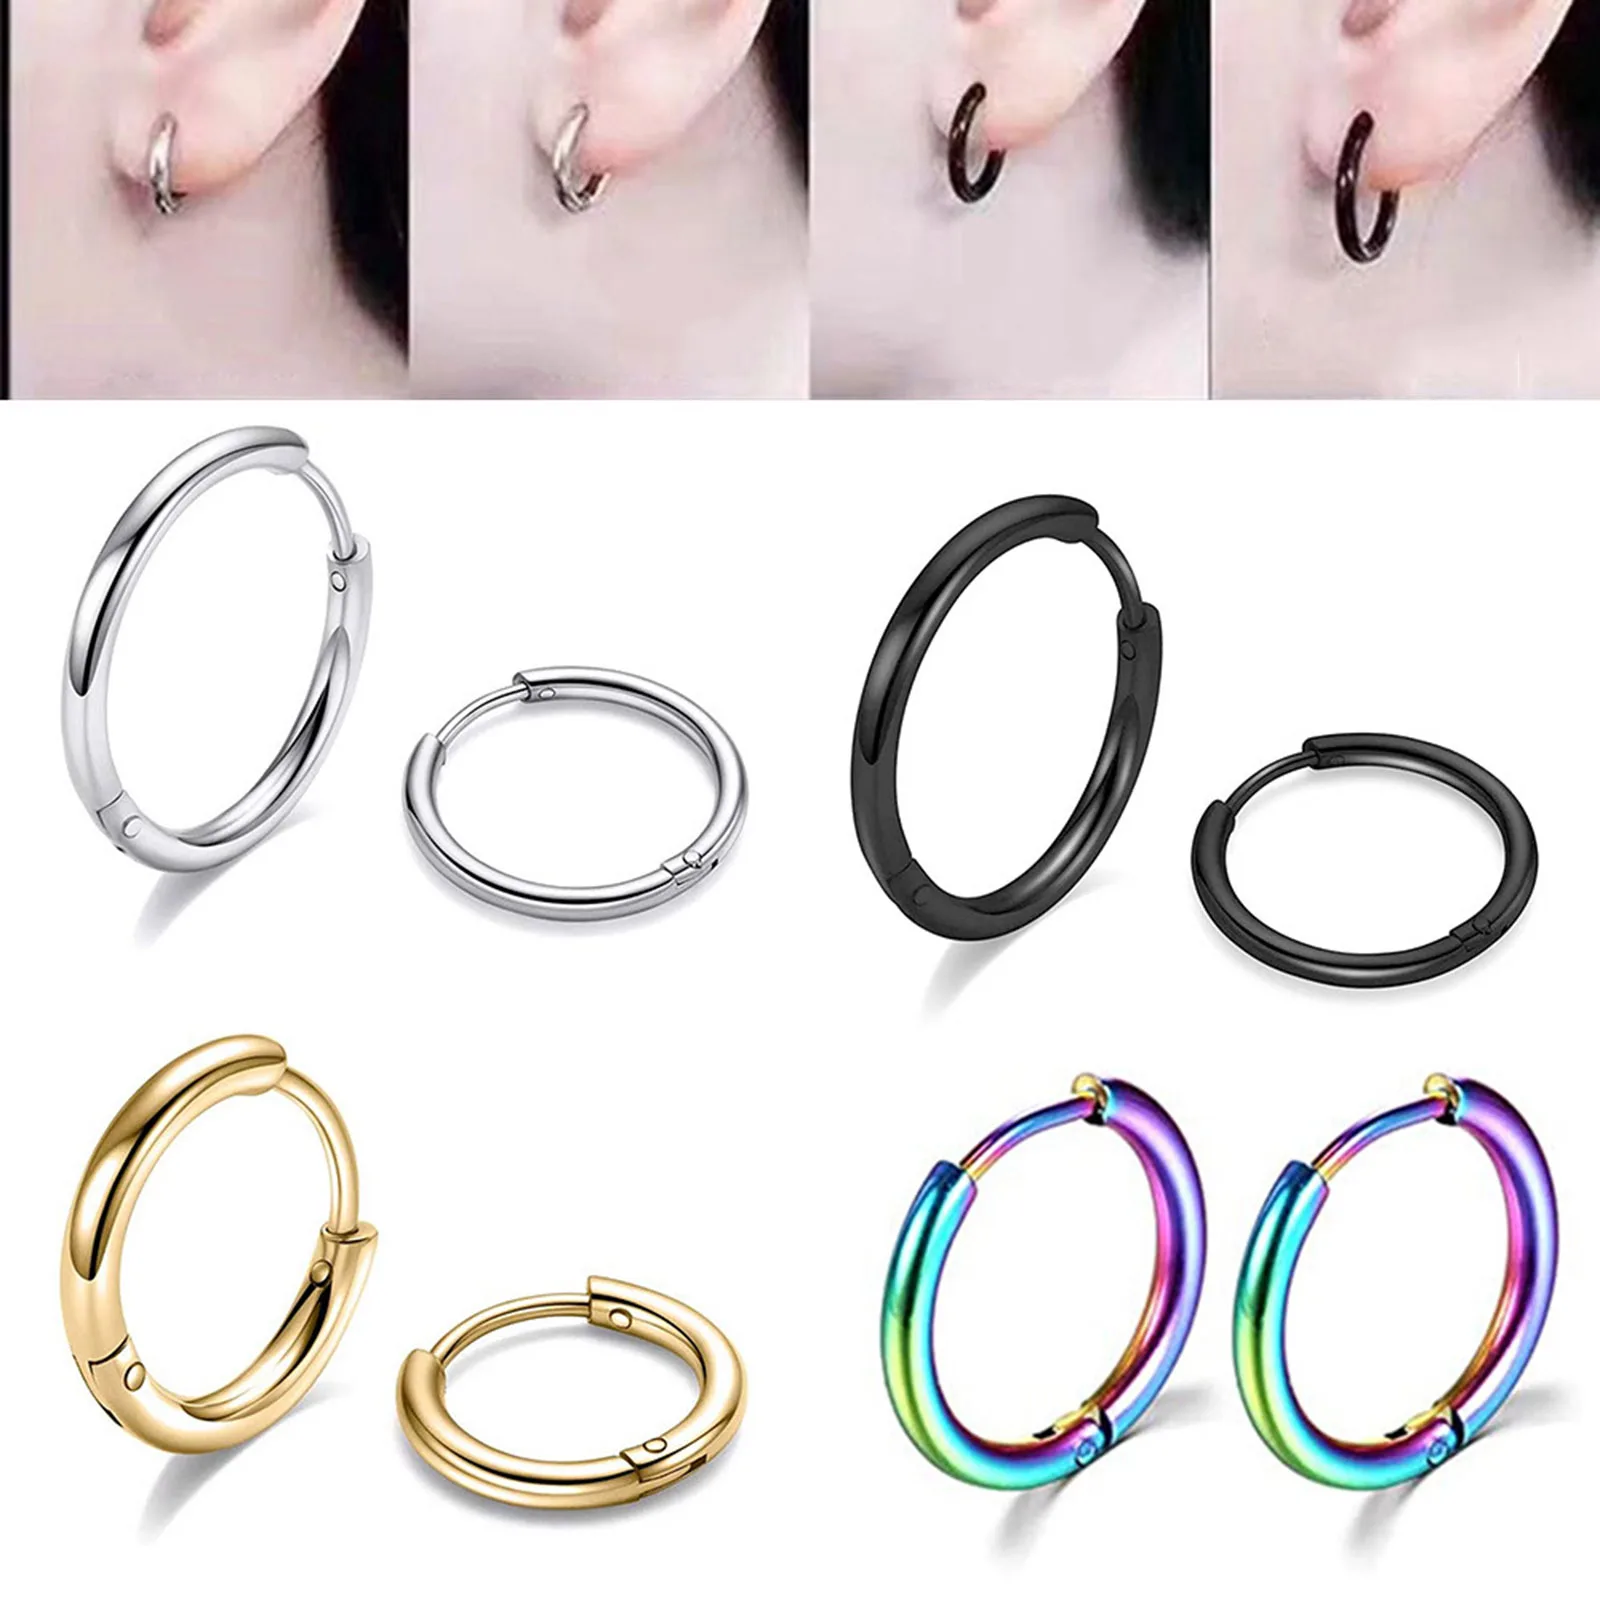 

1Pair Classic Concise Stainless Steel Hoop Circle Earrings For Women Men Jewelry Multicolor Round 12mm -16mm Ear Accessories